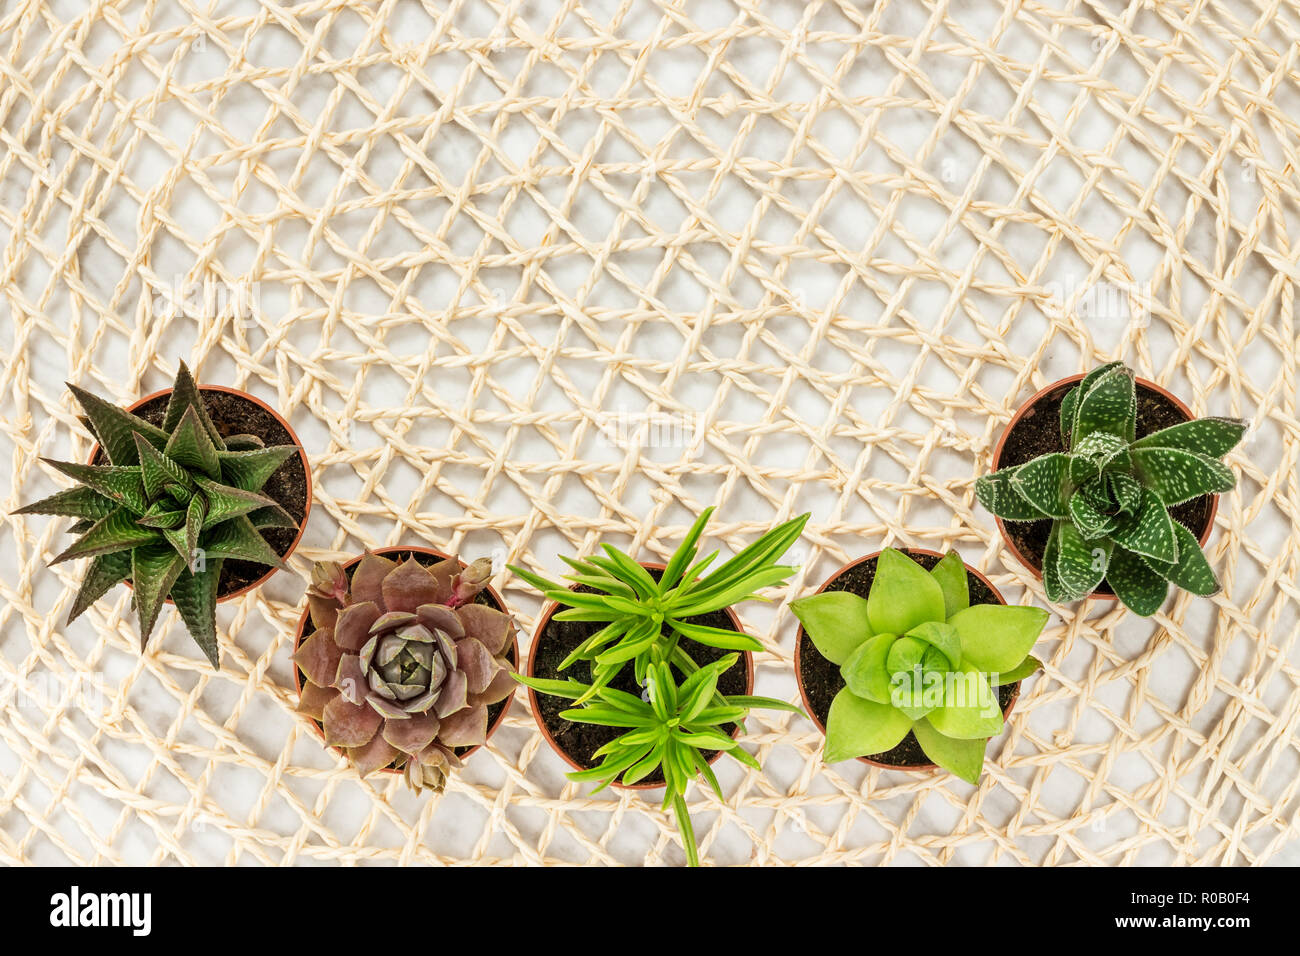 Little succulent plants on a mesh background made of natural materials, with copy space. Home decor. Stock Photo